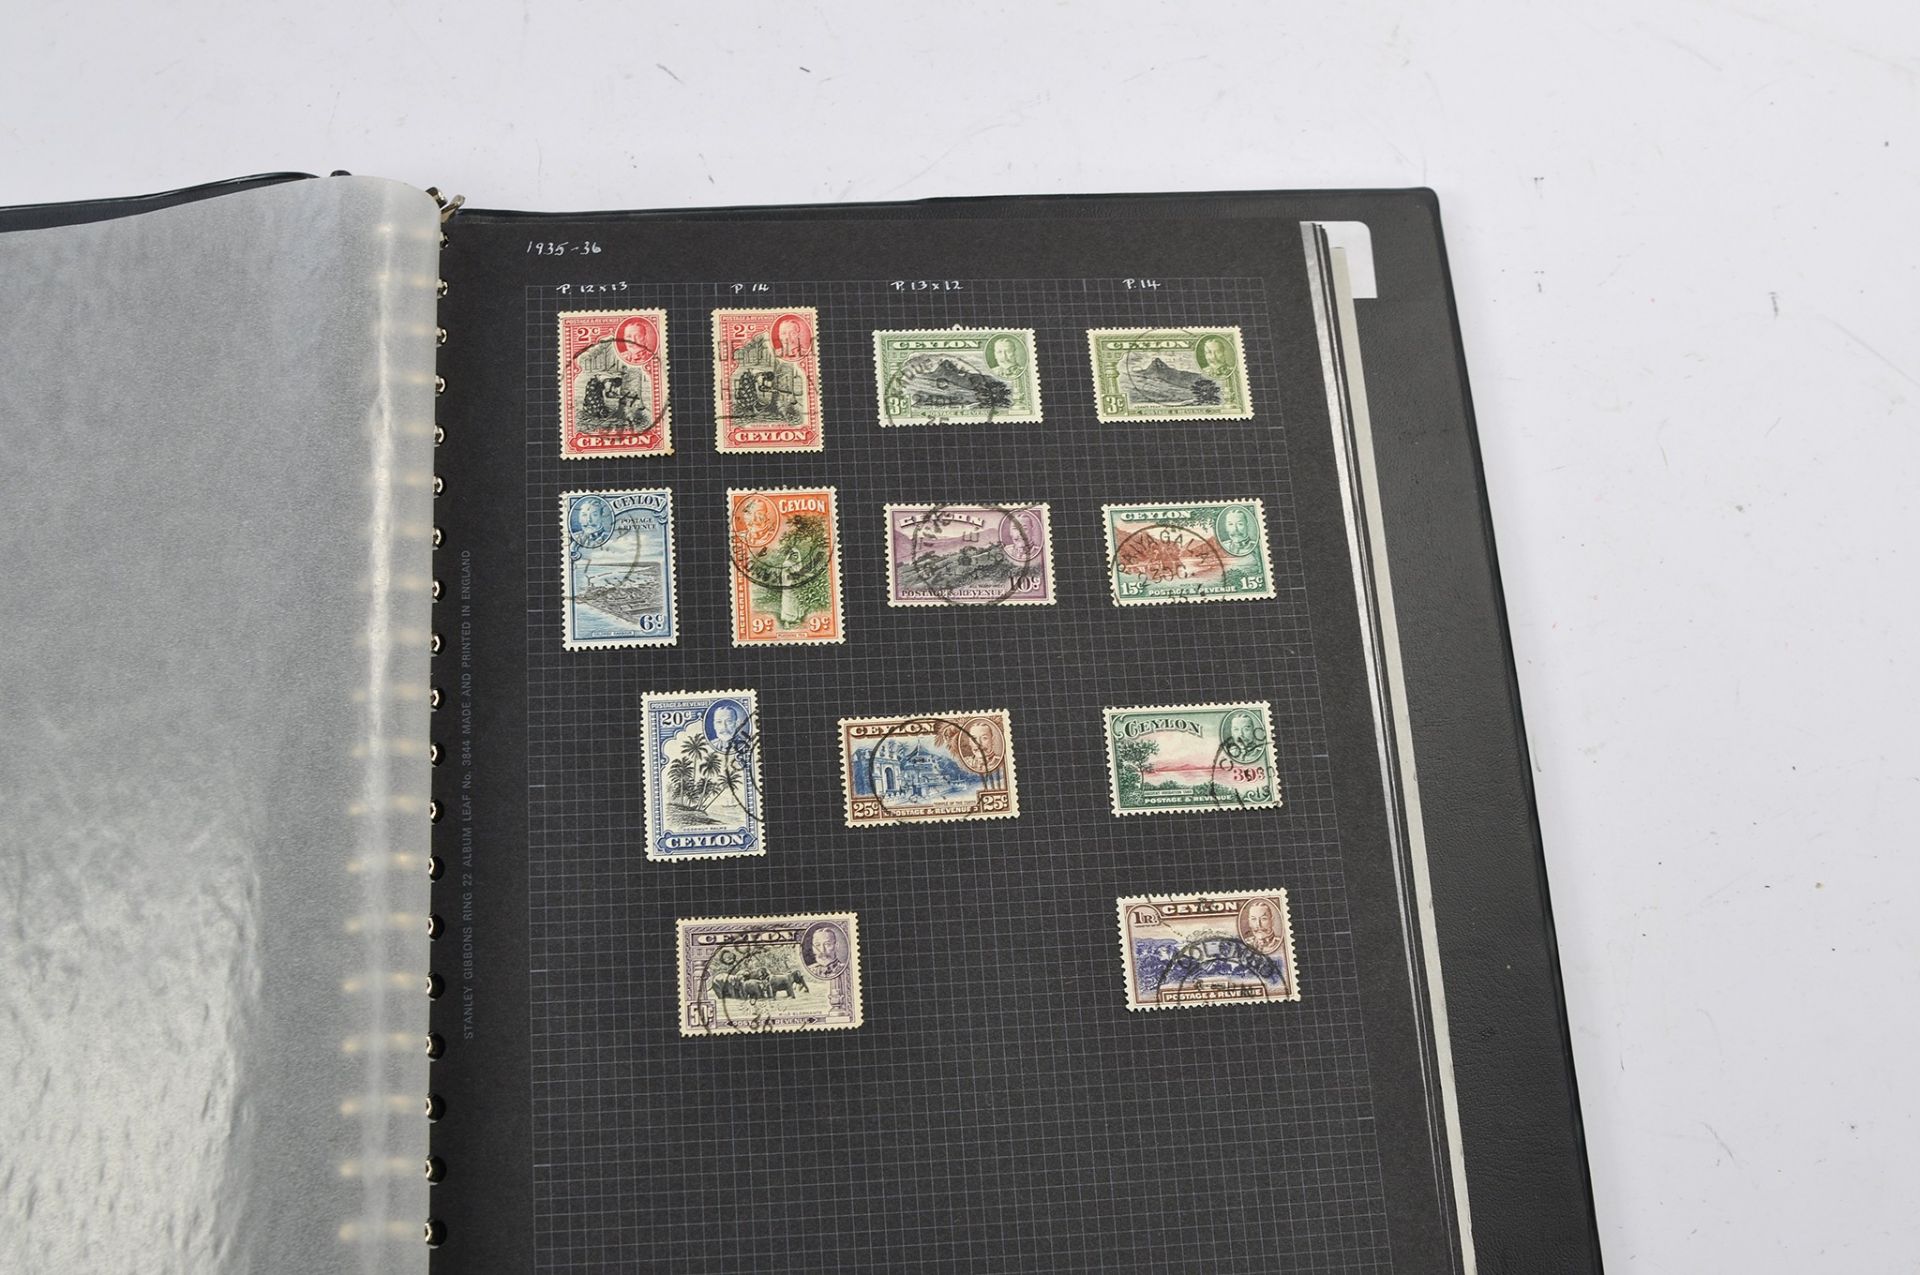 Stamps interest comprising large album of High Value Ceylon Stamps from 19th Century - Queen - Image 15 of 15